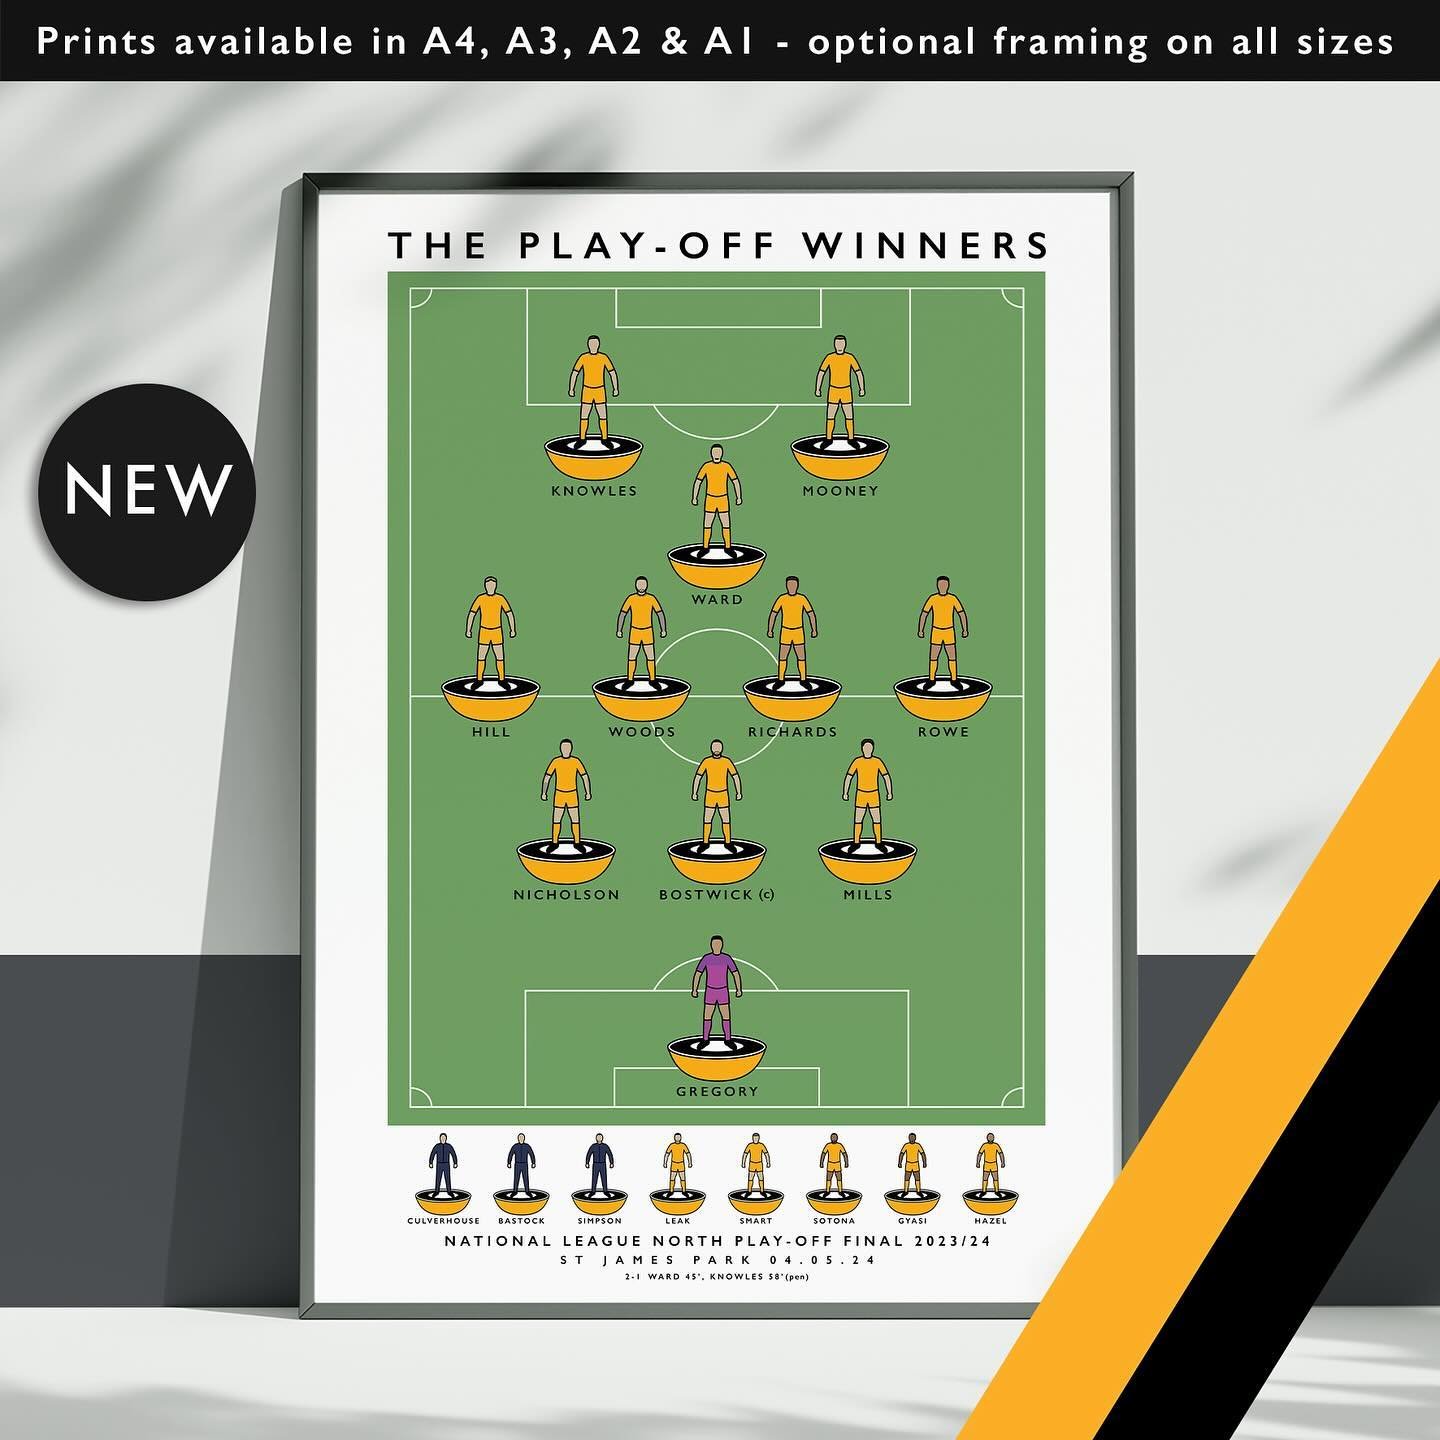 Boston United The Play-Off Winners 

Prints available in A4, A3, A2 &amp; A1 with optional framing 

Get 10% off until midnight with the discount code 
THE-PILGRIMS 

Shop now: matthewjiwood.com/subbuteo-teams&hellip;

#BostonUnited #BUFC #Pilgrims